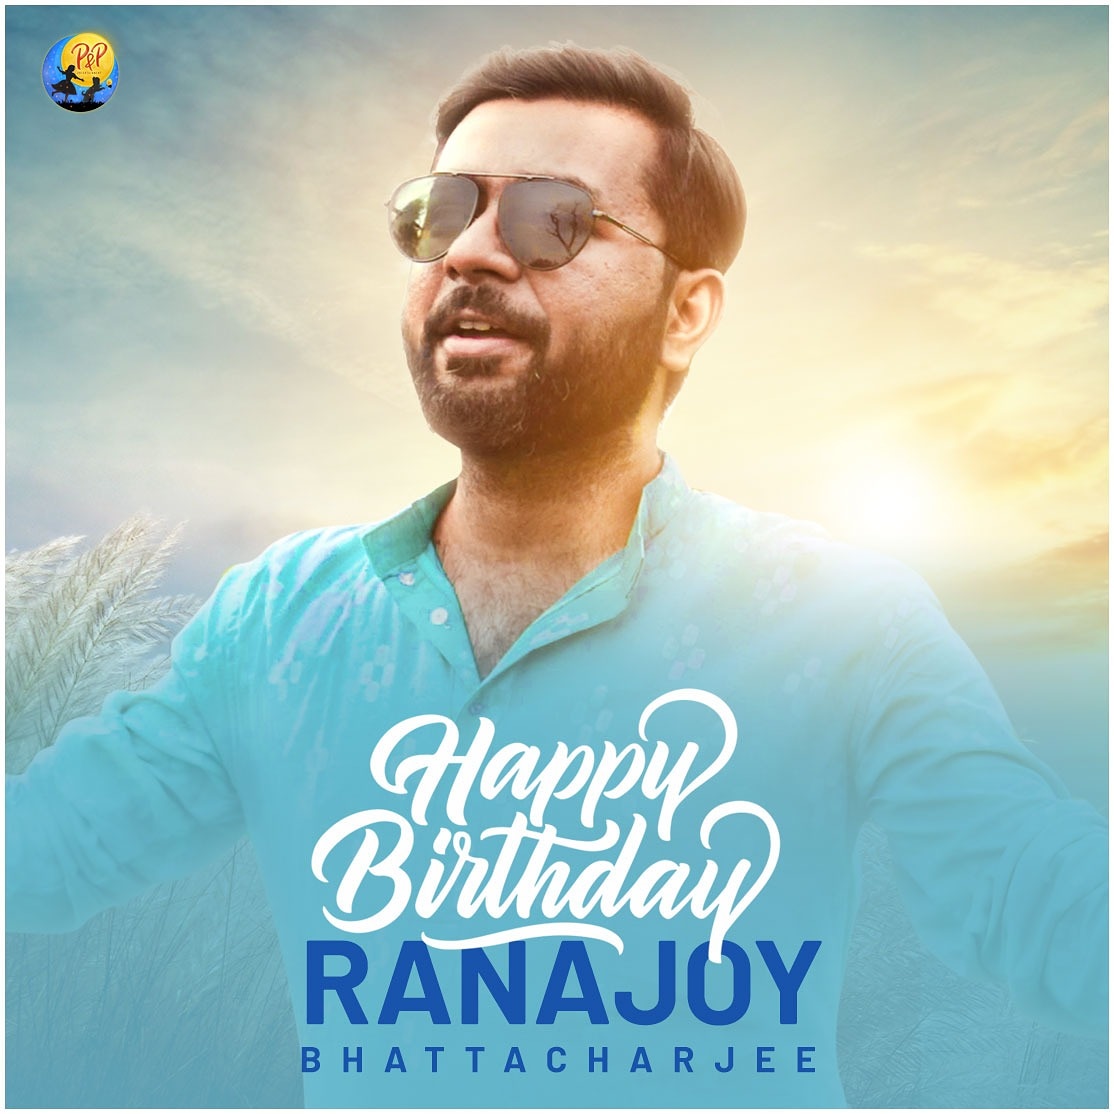 We wish a tuneful Happy Birthday to our very own #Ranajoybhattacharjee  Your soulful music has made our every creation an indelible one! We wish to create many more masterpiece together! God Bless you @ranajoybh @shieladitya @Shrikan13615308 @SudipMu51013678 @Chandri42153068